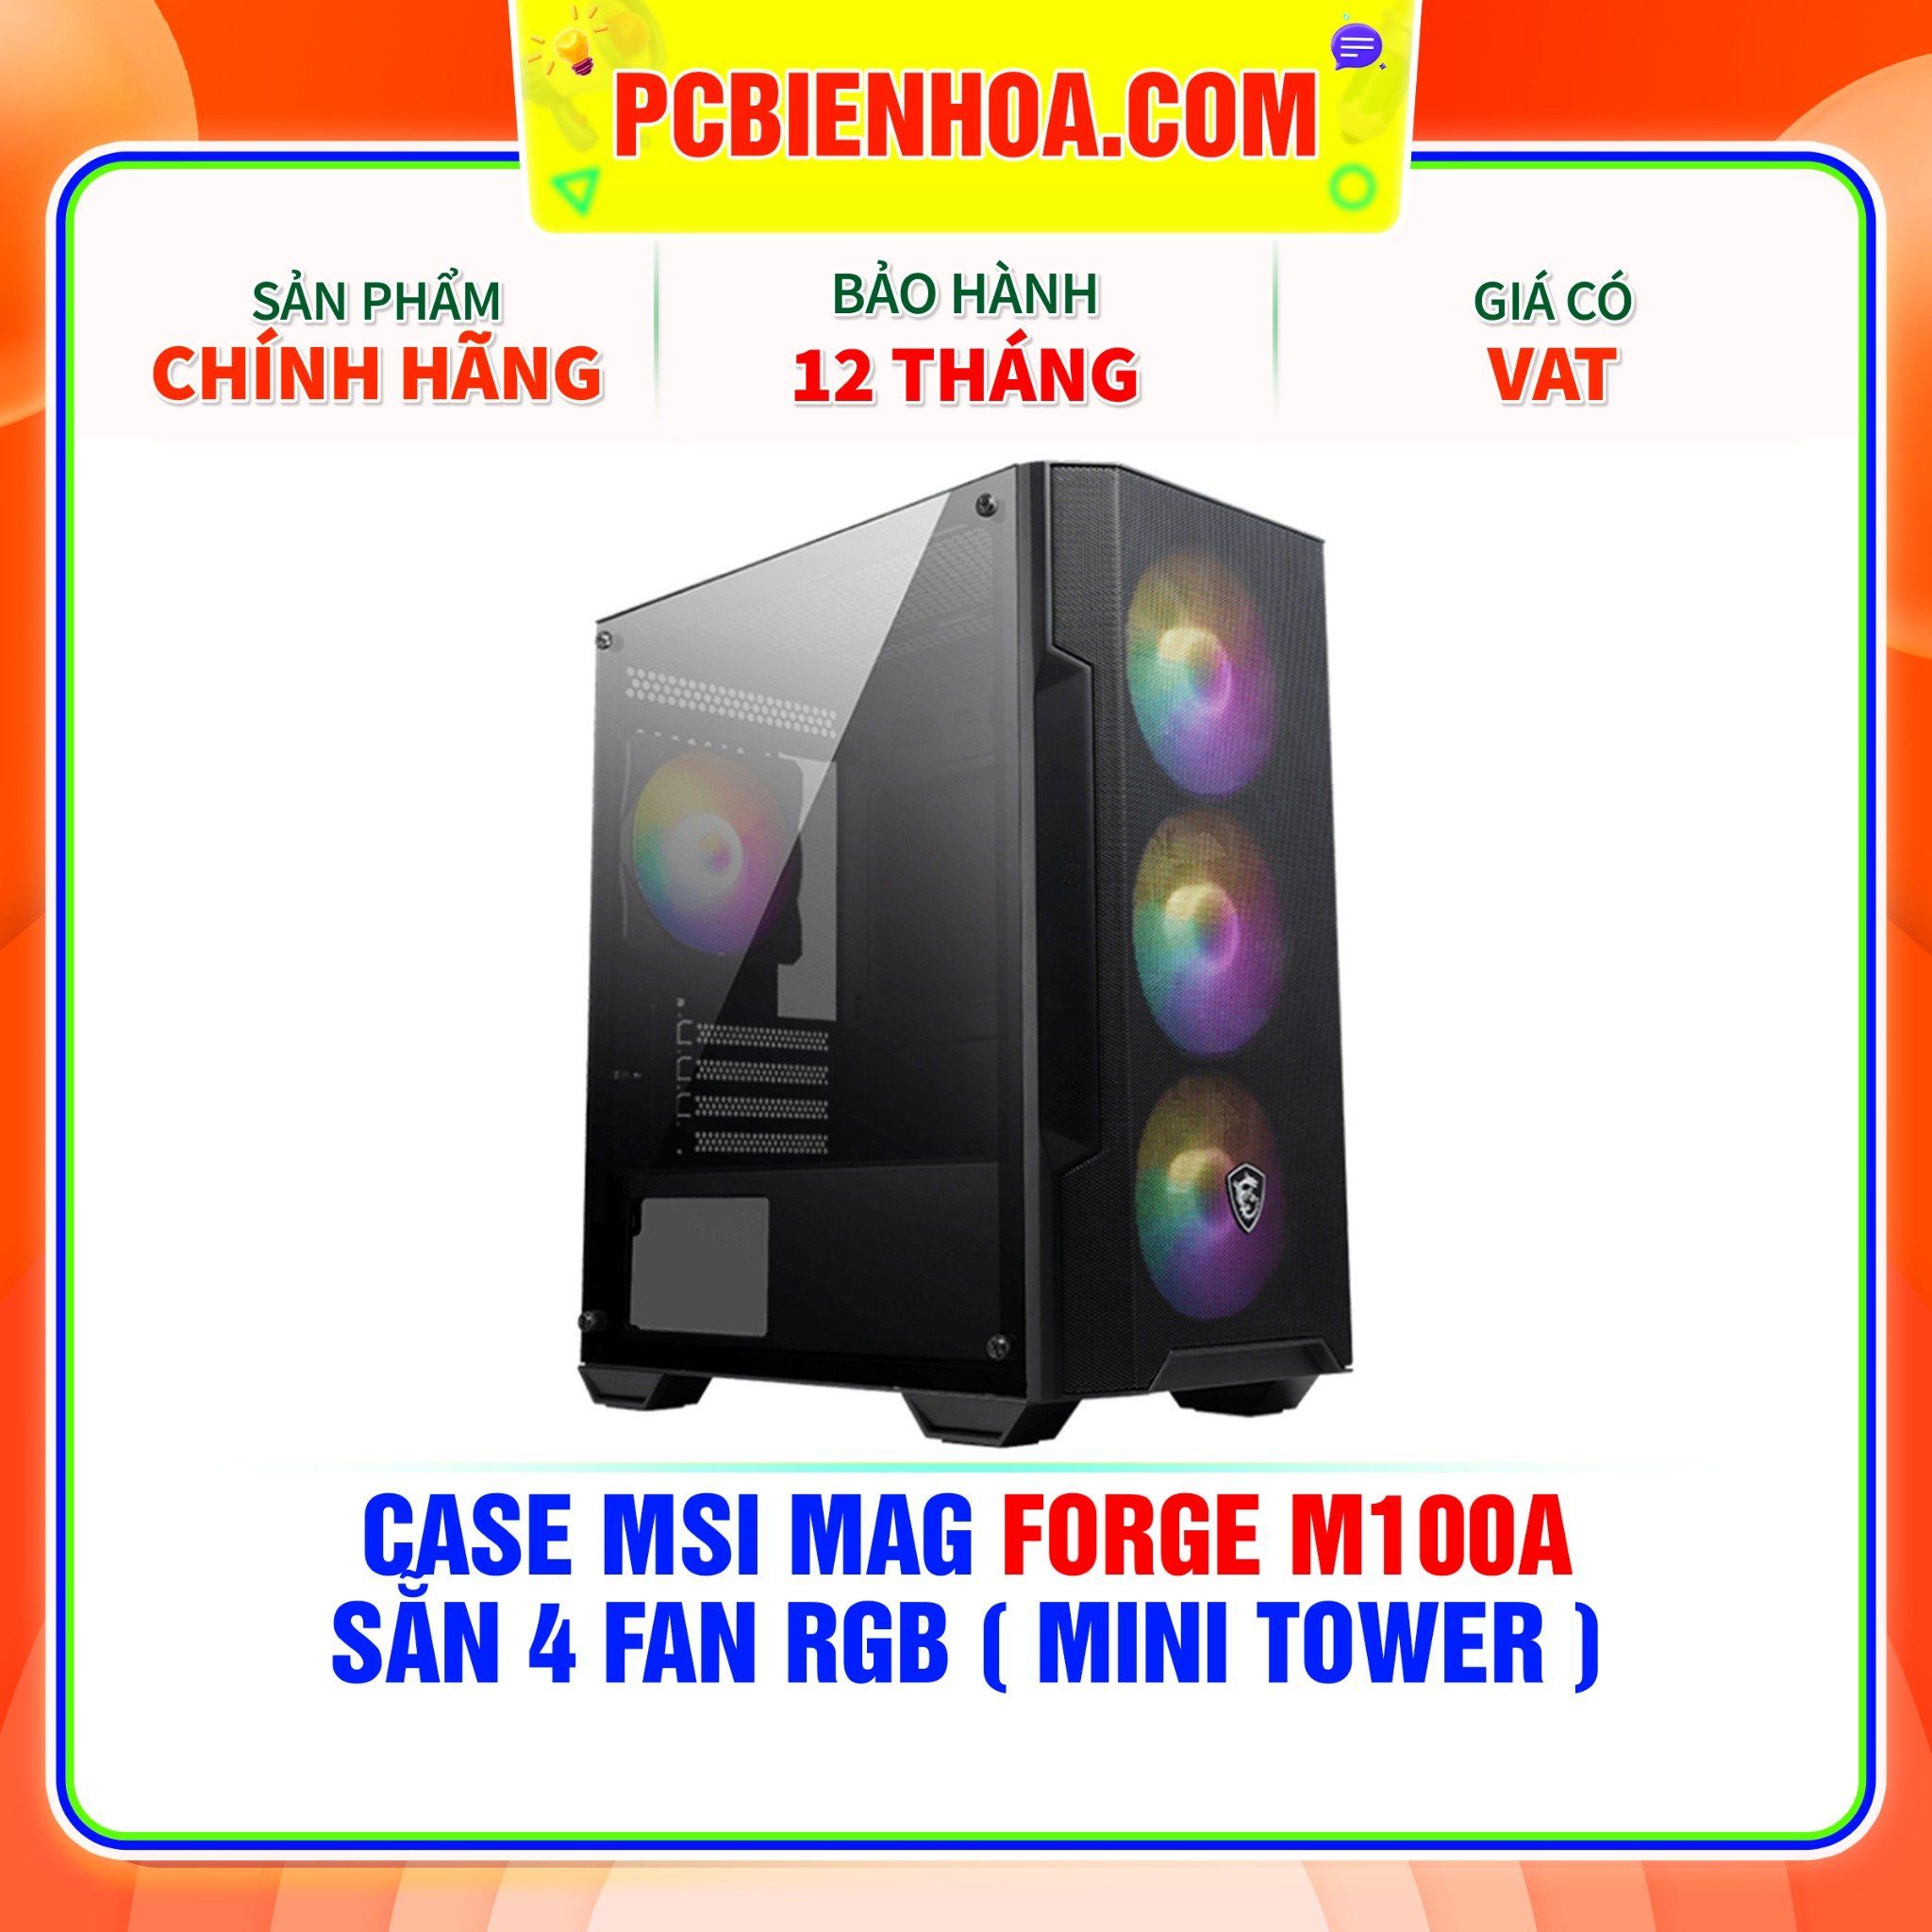  CASE MSI MAG FORGE M100A - SẴN 4 FAN RGB ( MINI TOWER ) 